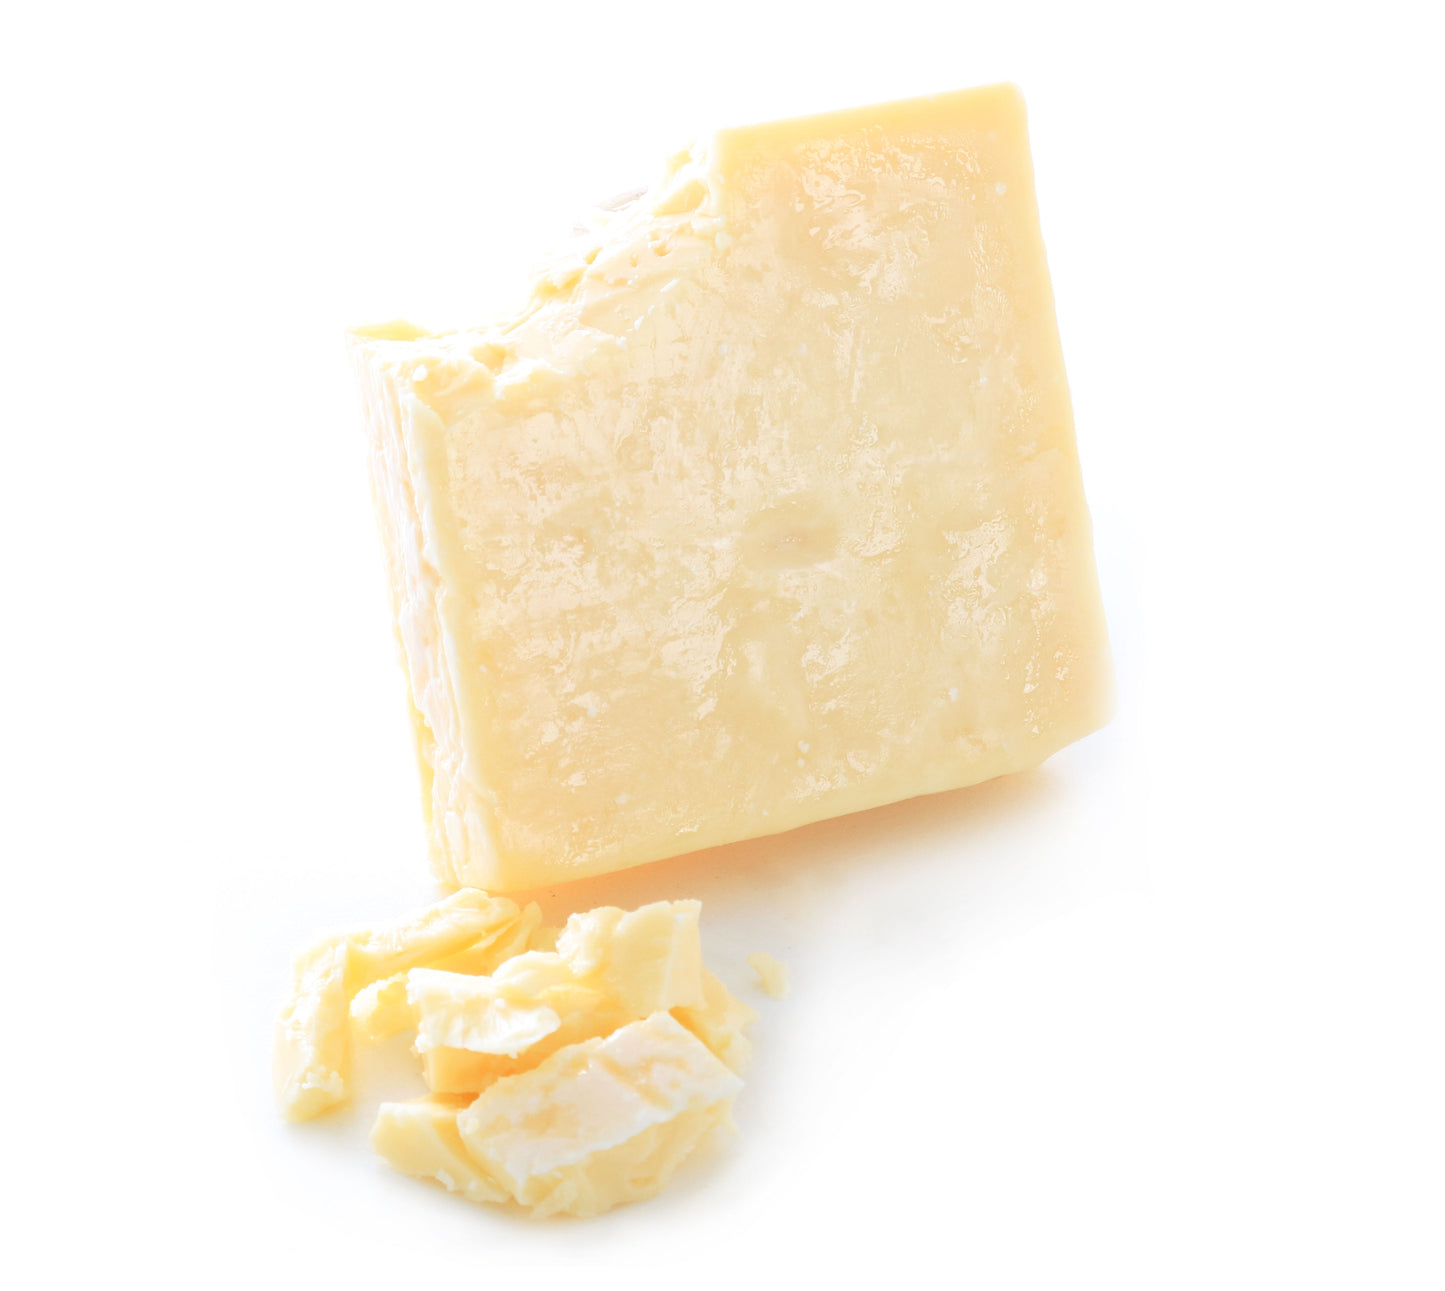 8 ounce piece of 12 year aged white wisconsin cheddar cheese